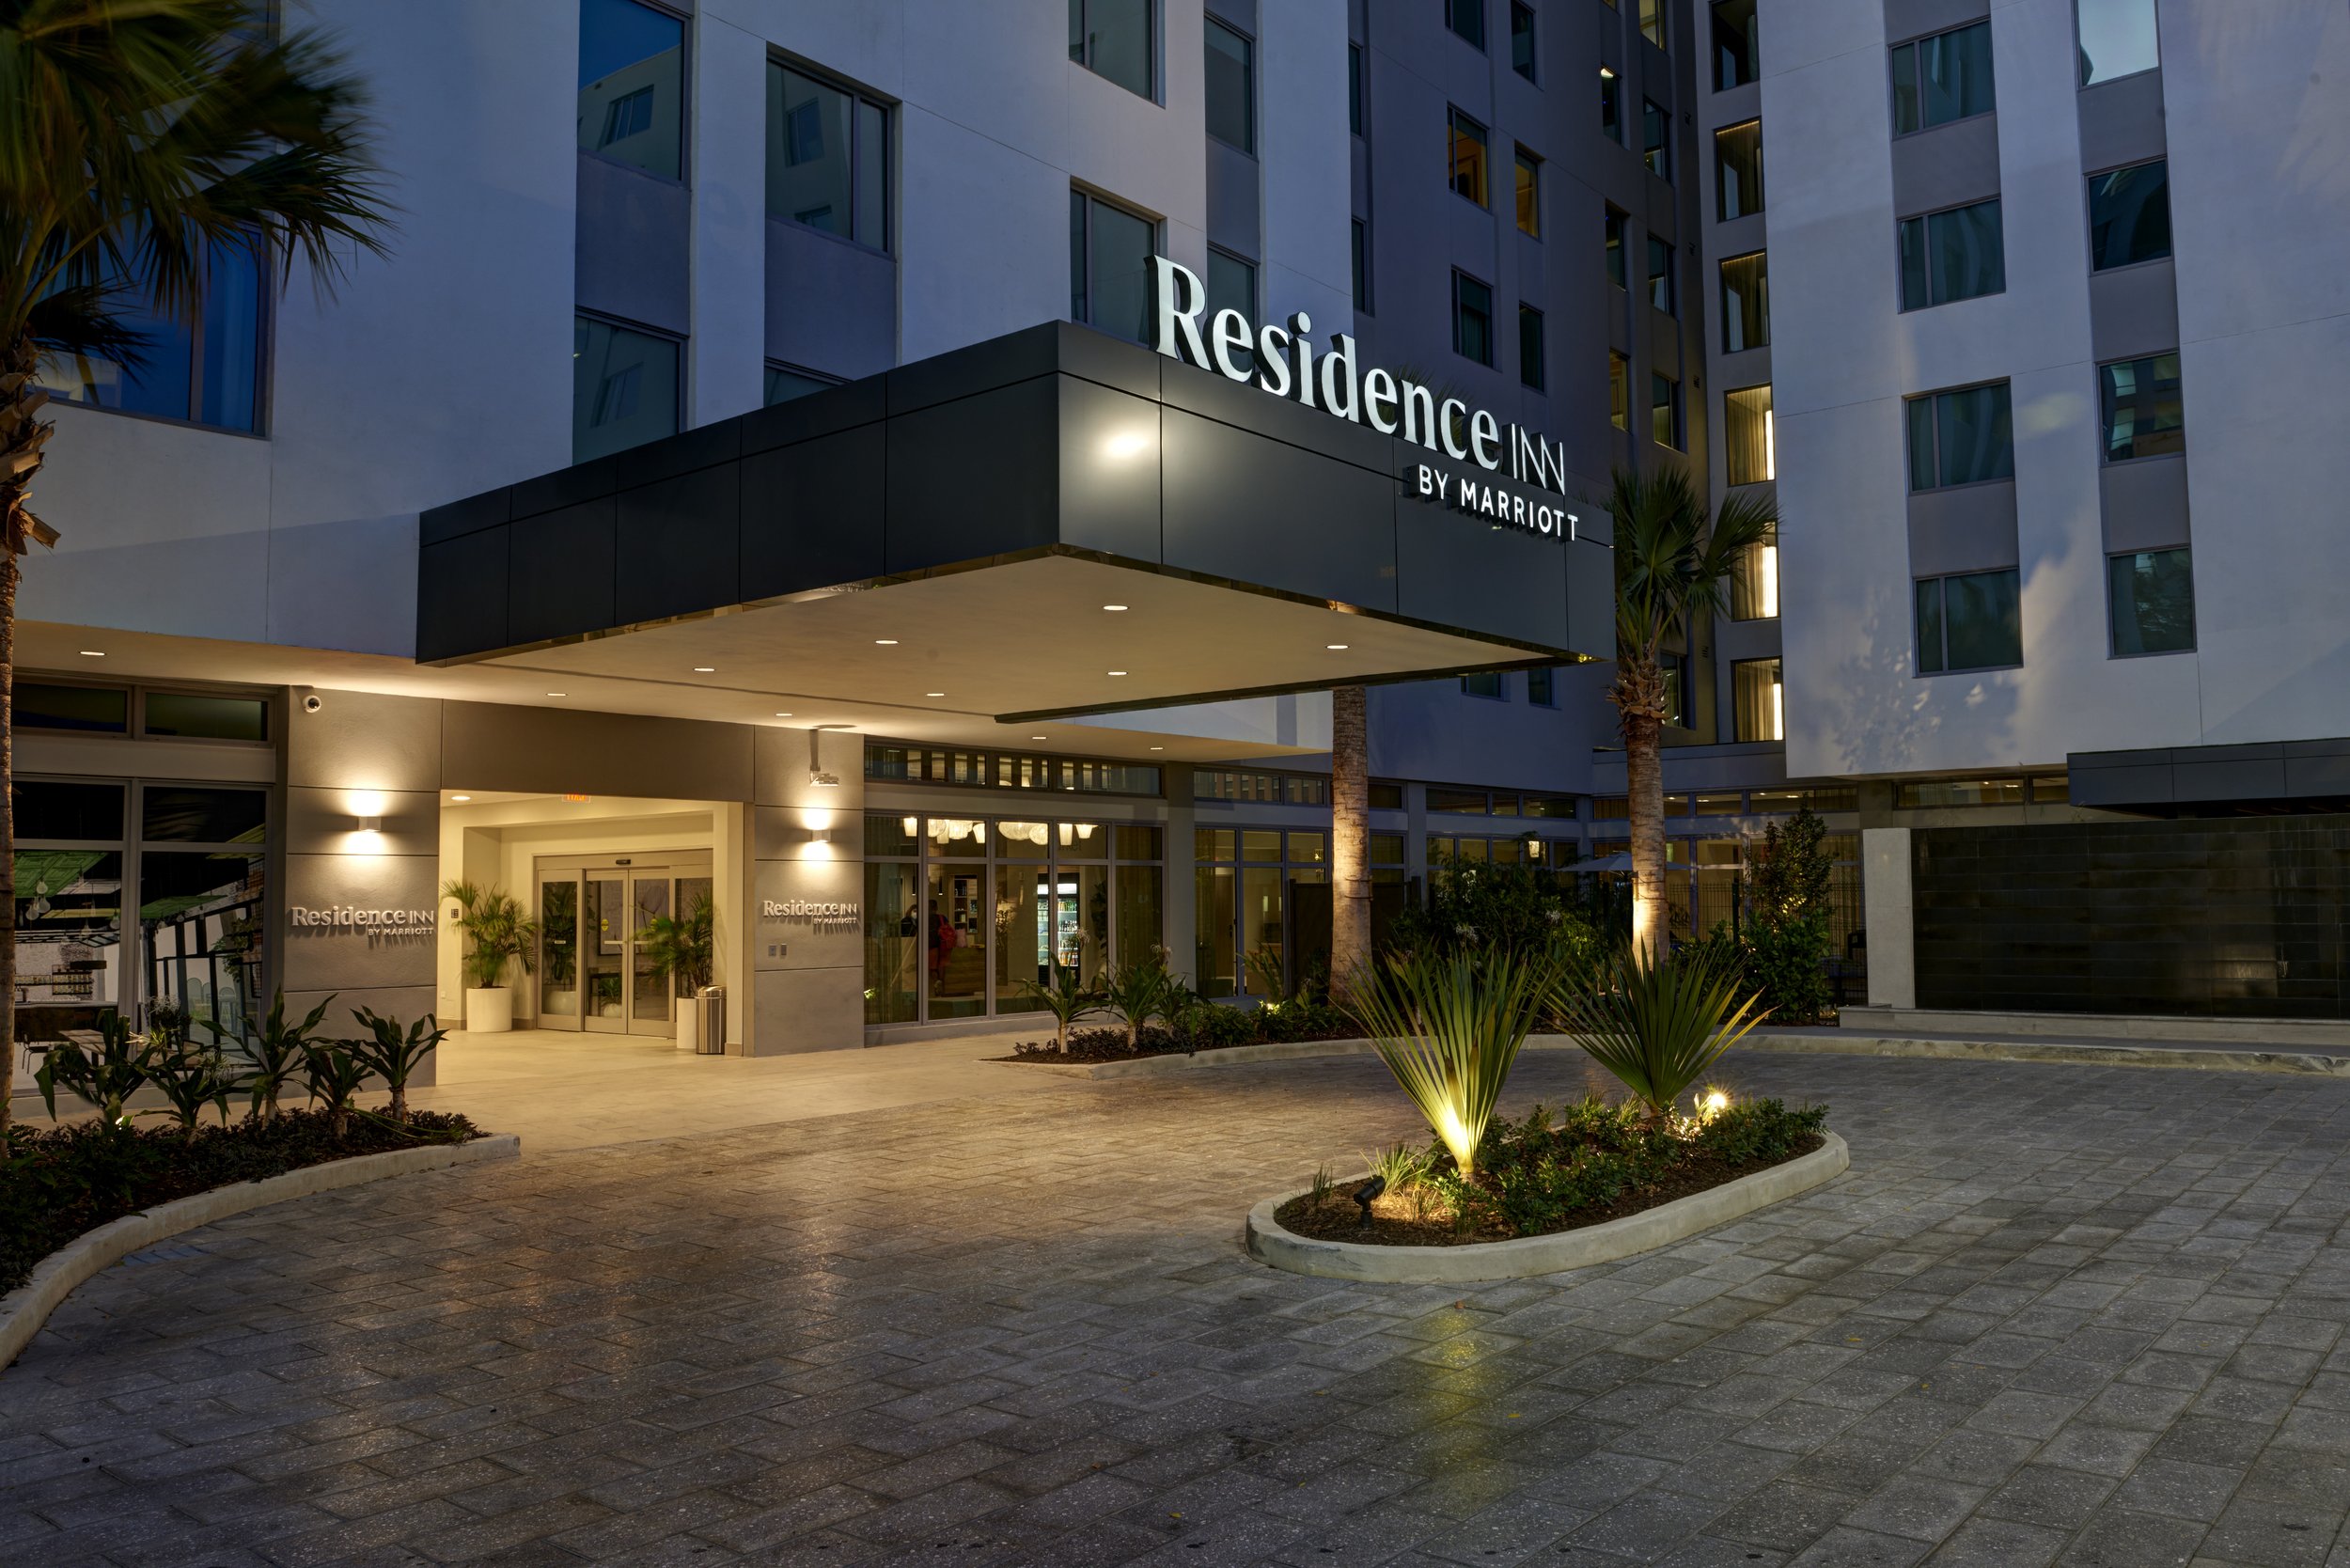  Exterior view of the Residence Inn by Marriott hospitality project. 